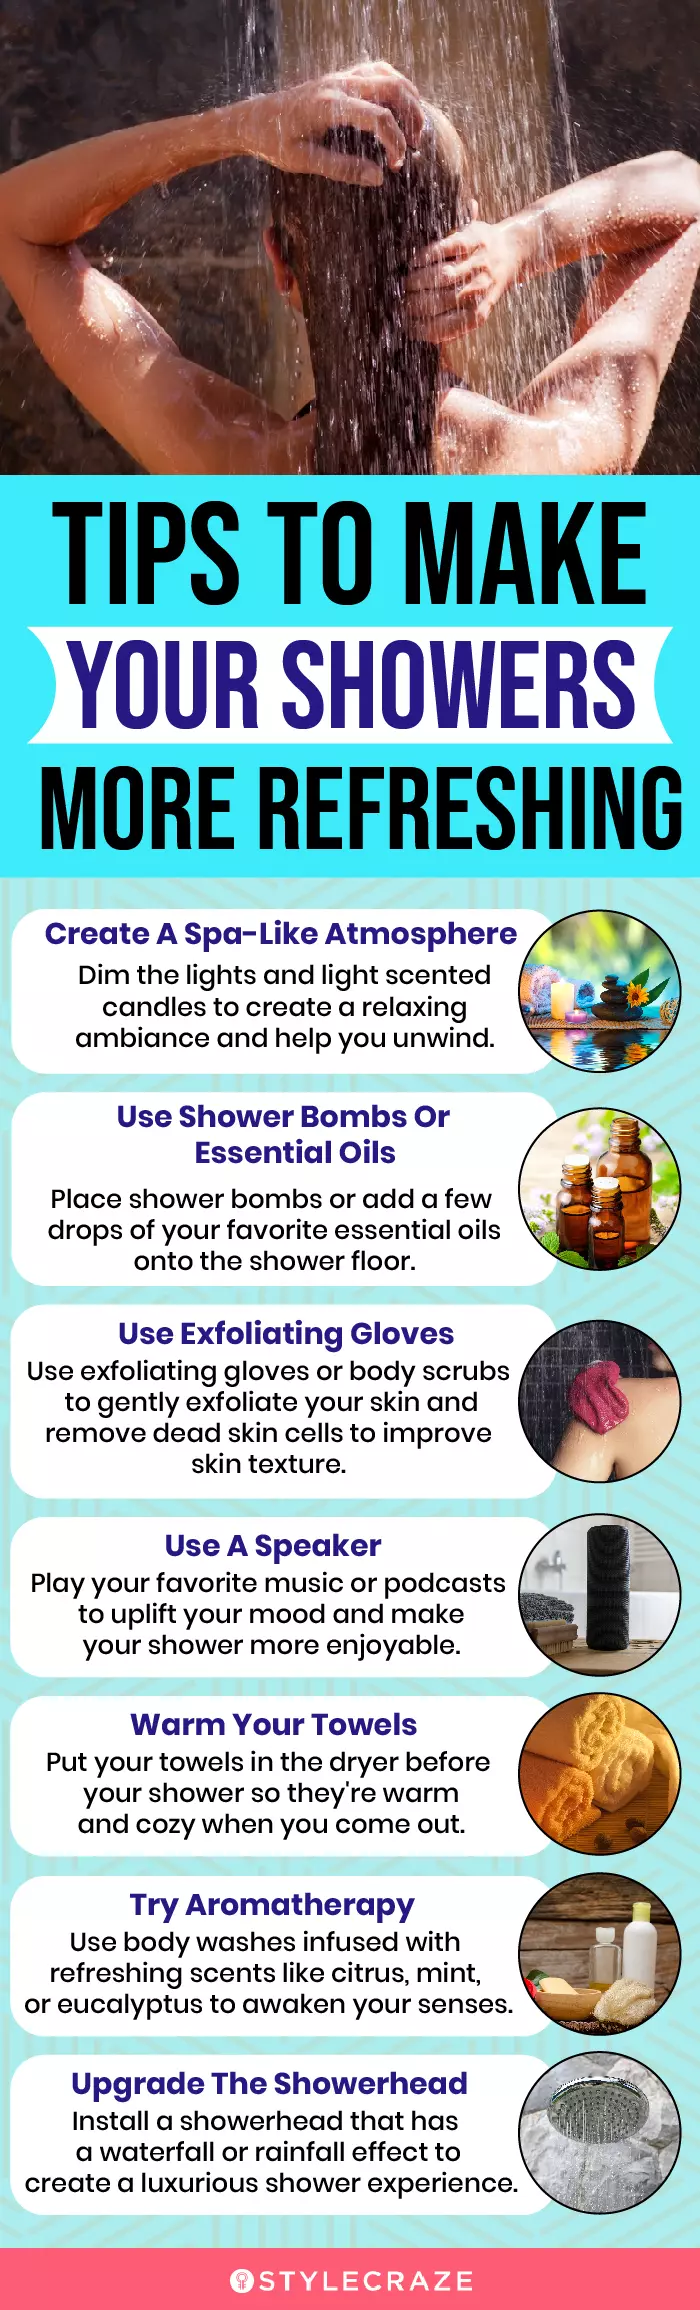 Tips To Make Your Showers More Refreshing (infographic)